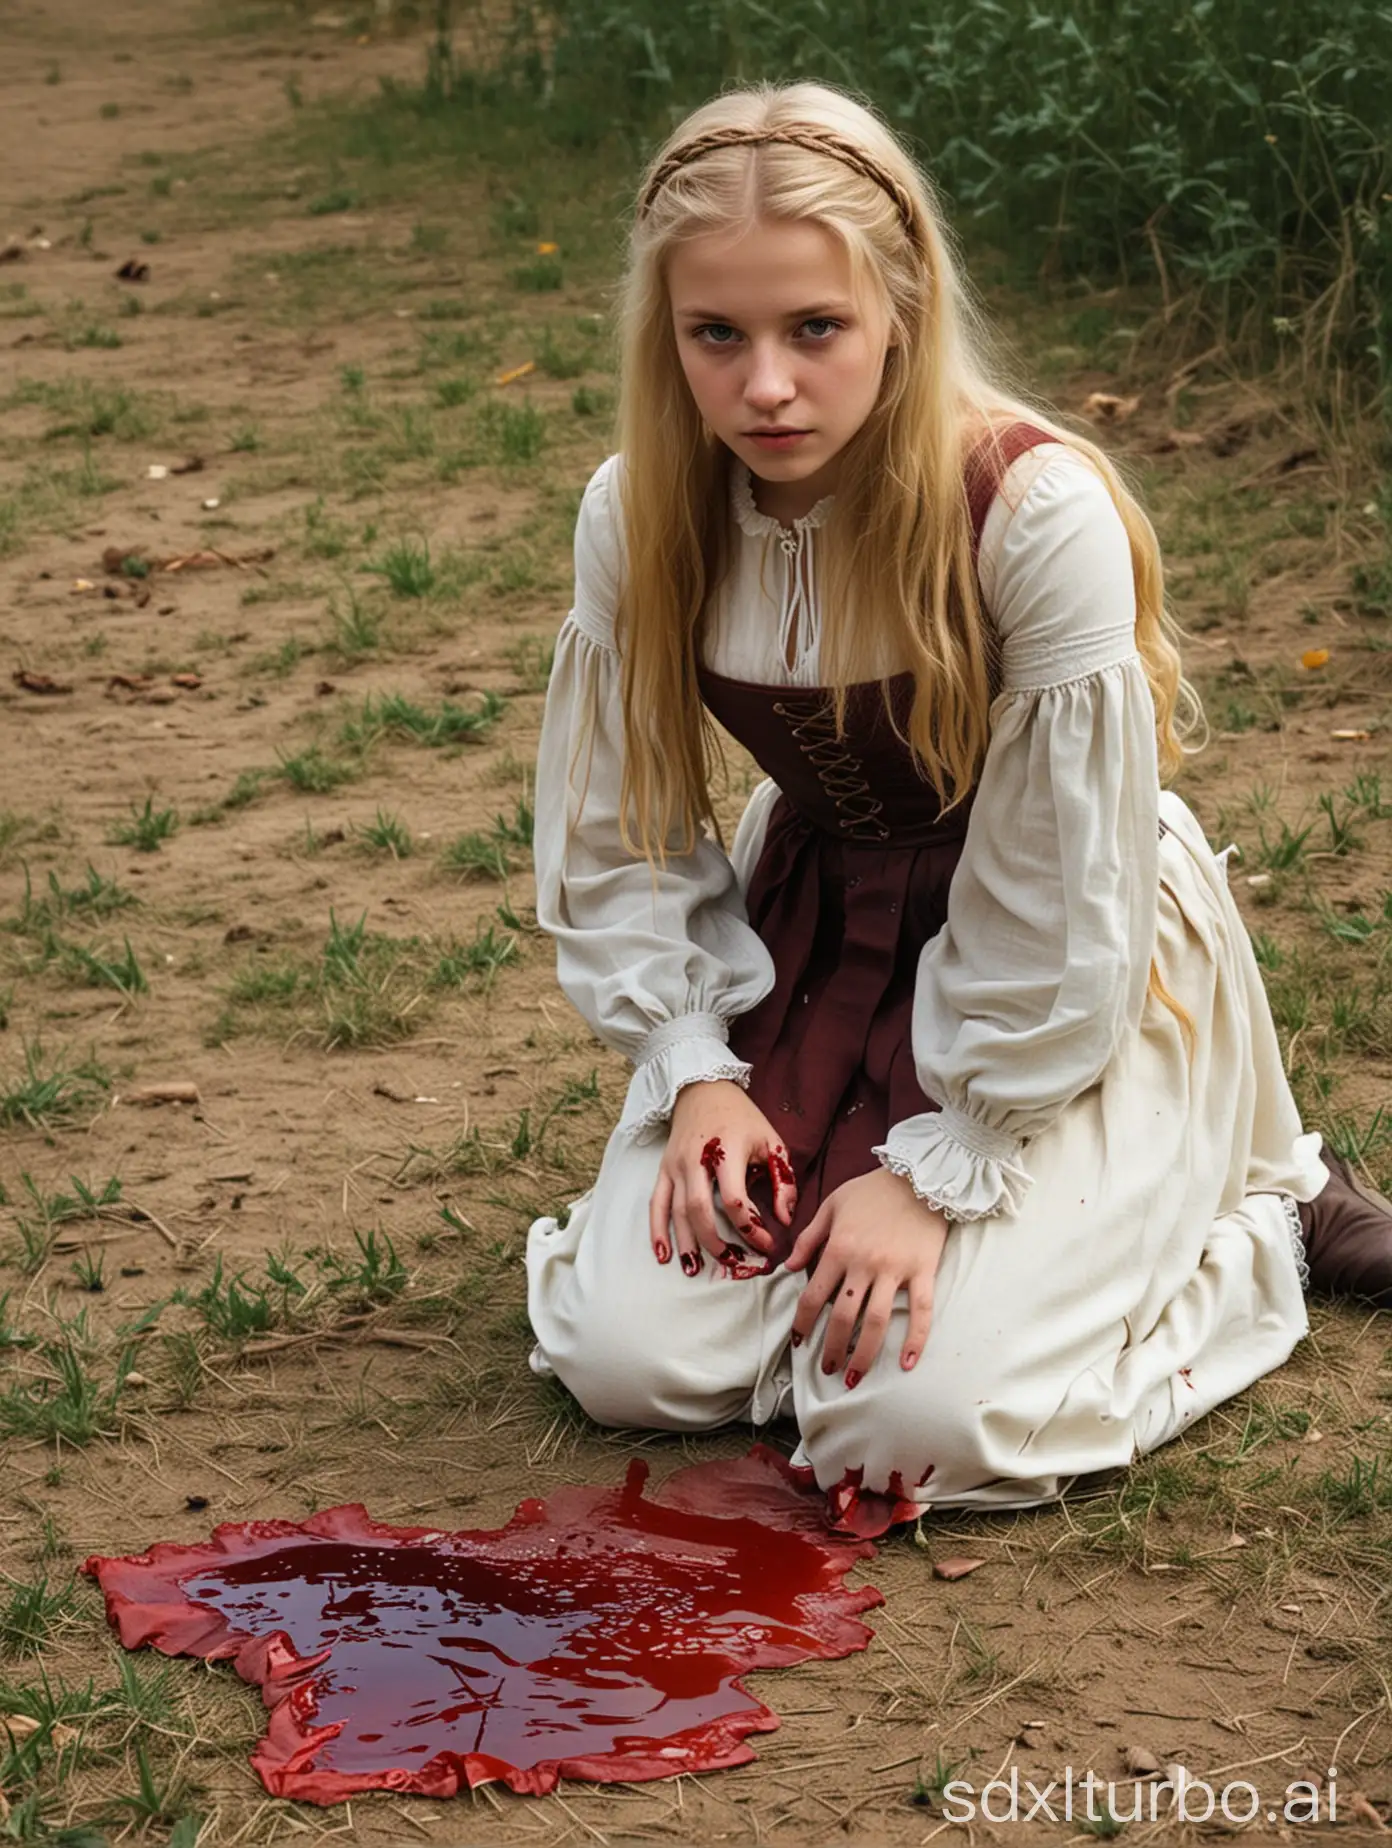 Blonde-Girl-in-15th-Century-Attire-Kneeling-with-Blood-Stains